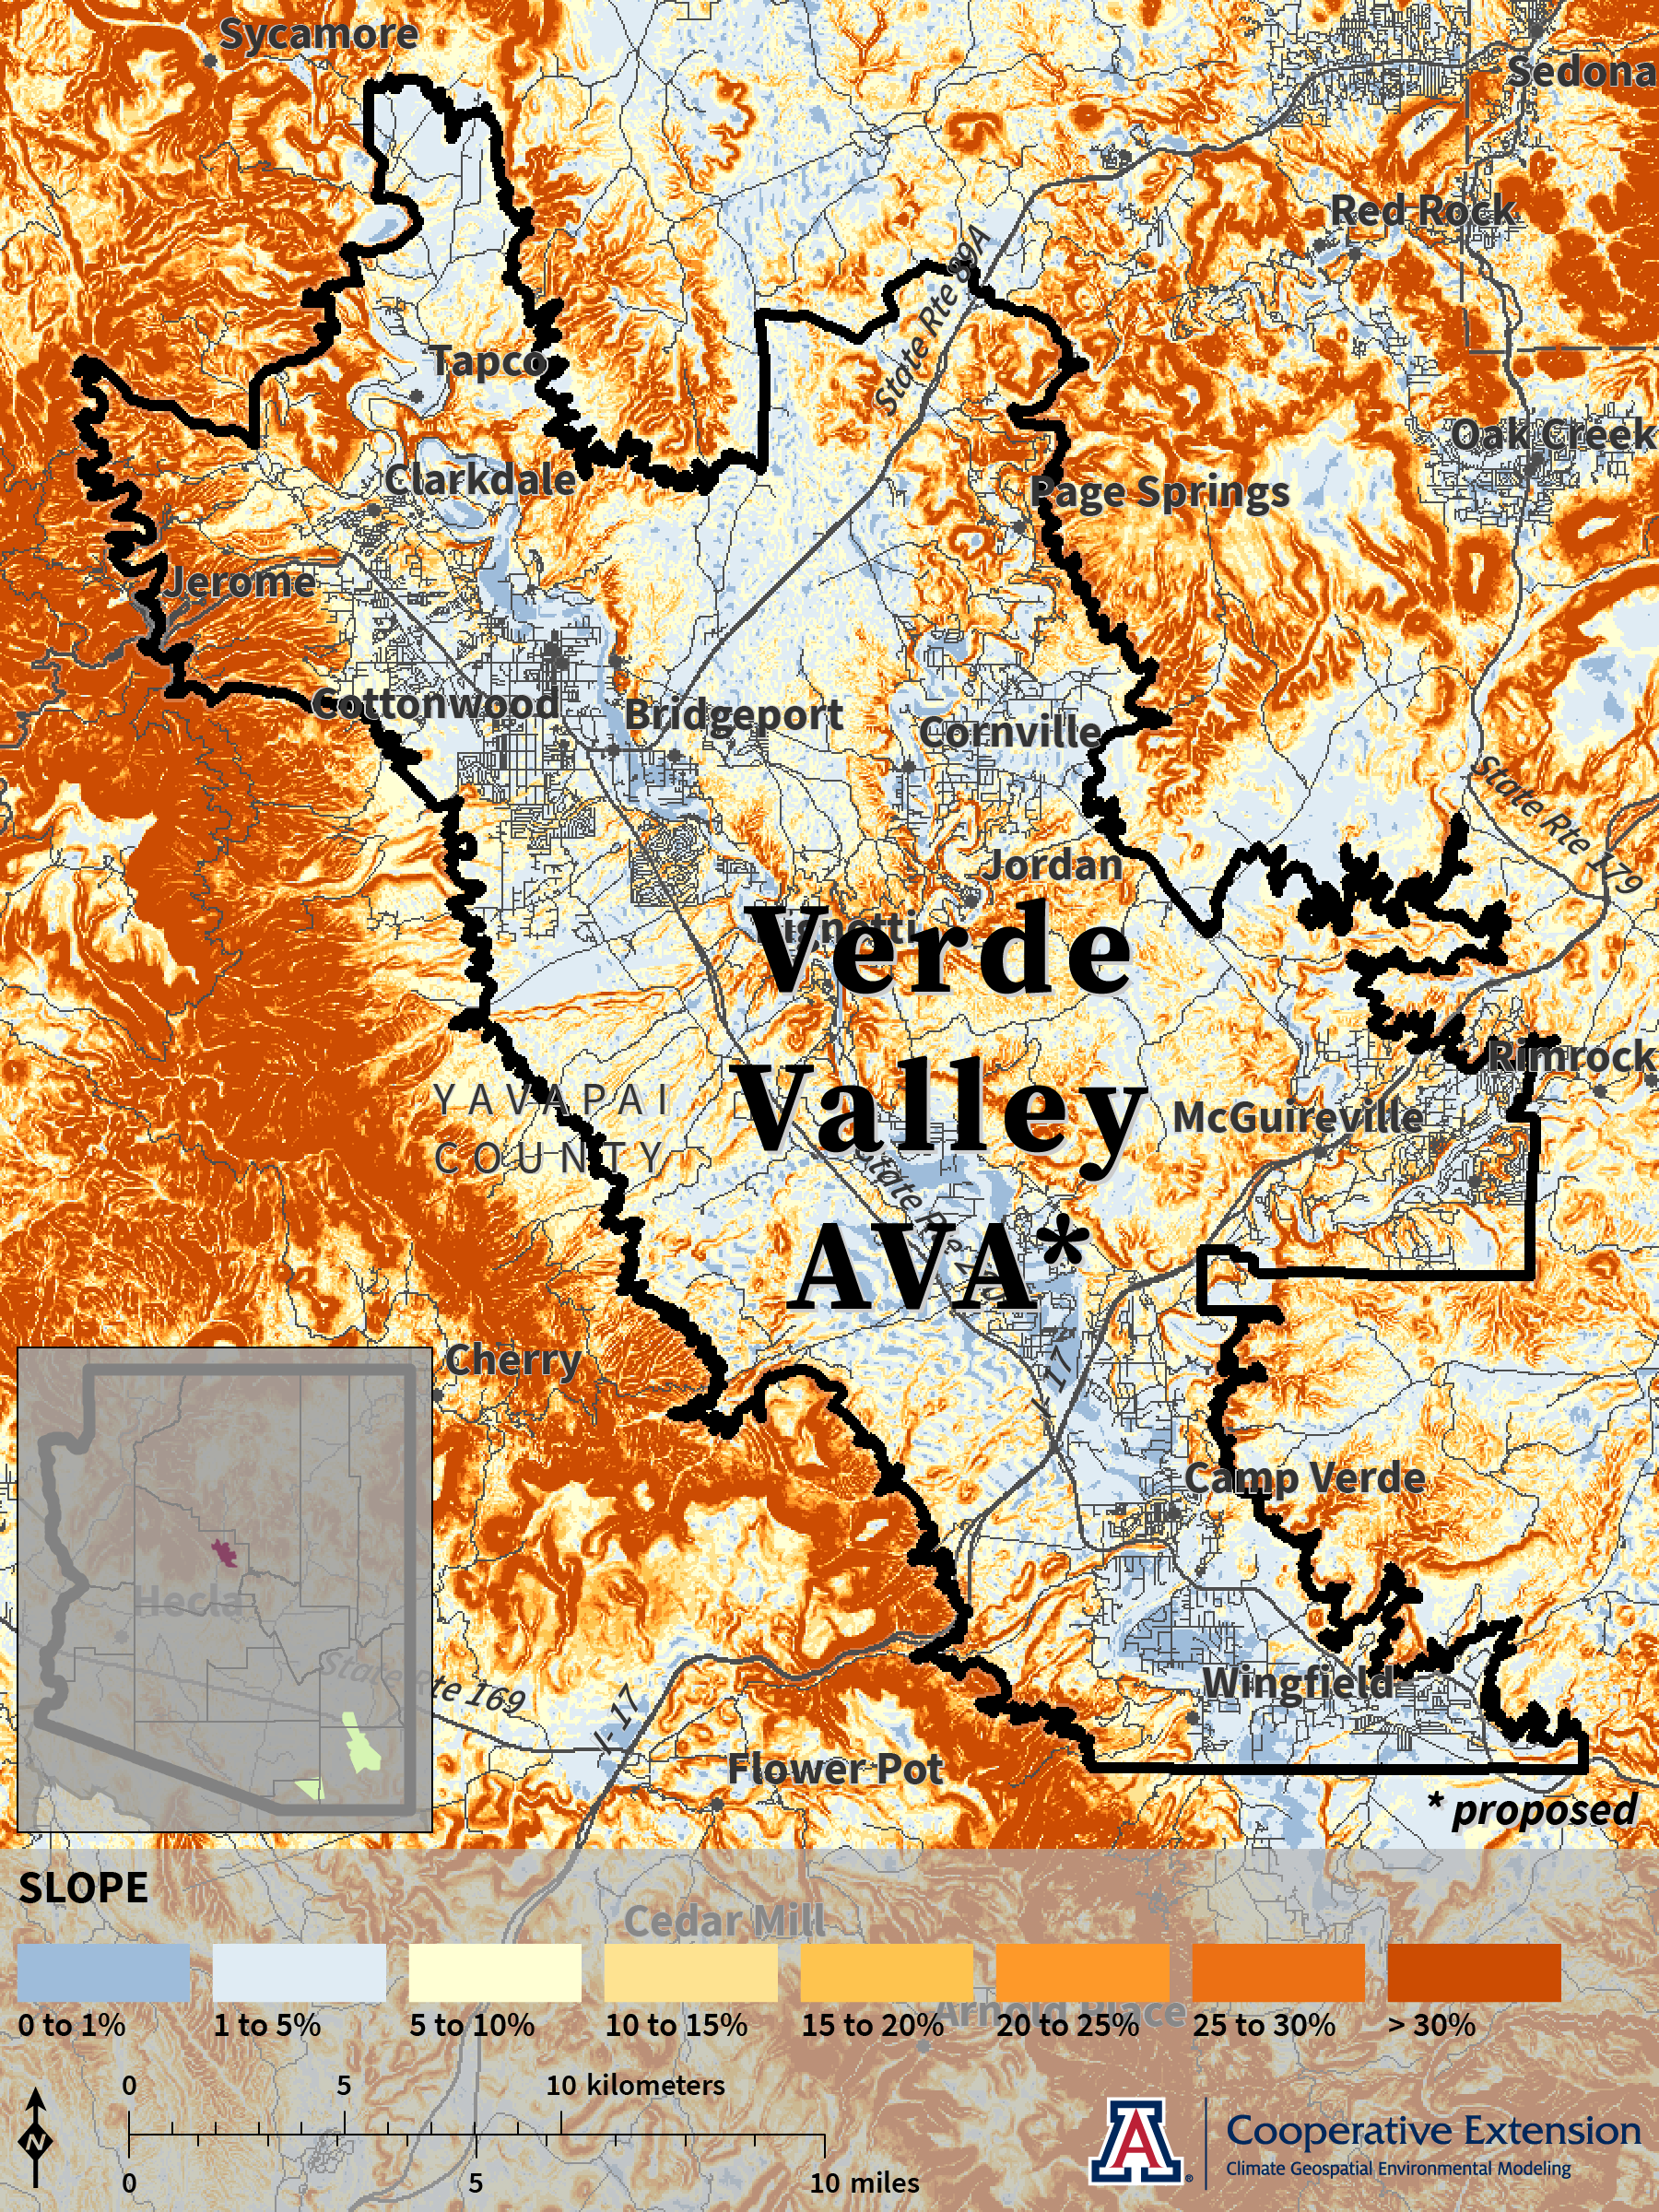 Slope map for proposed Verde Valley AVA